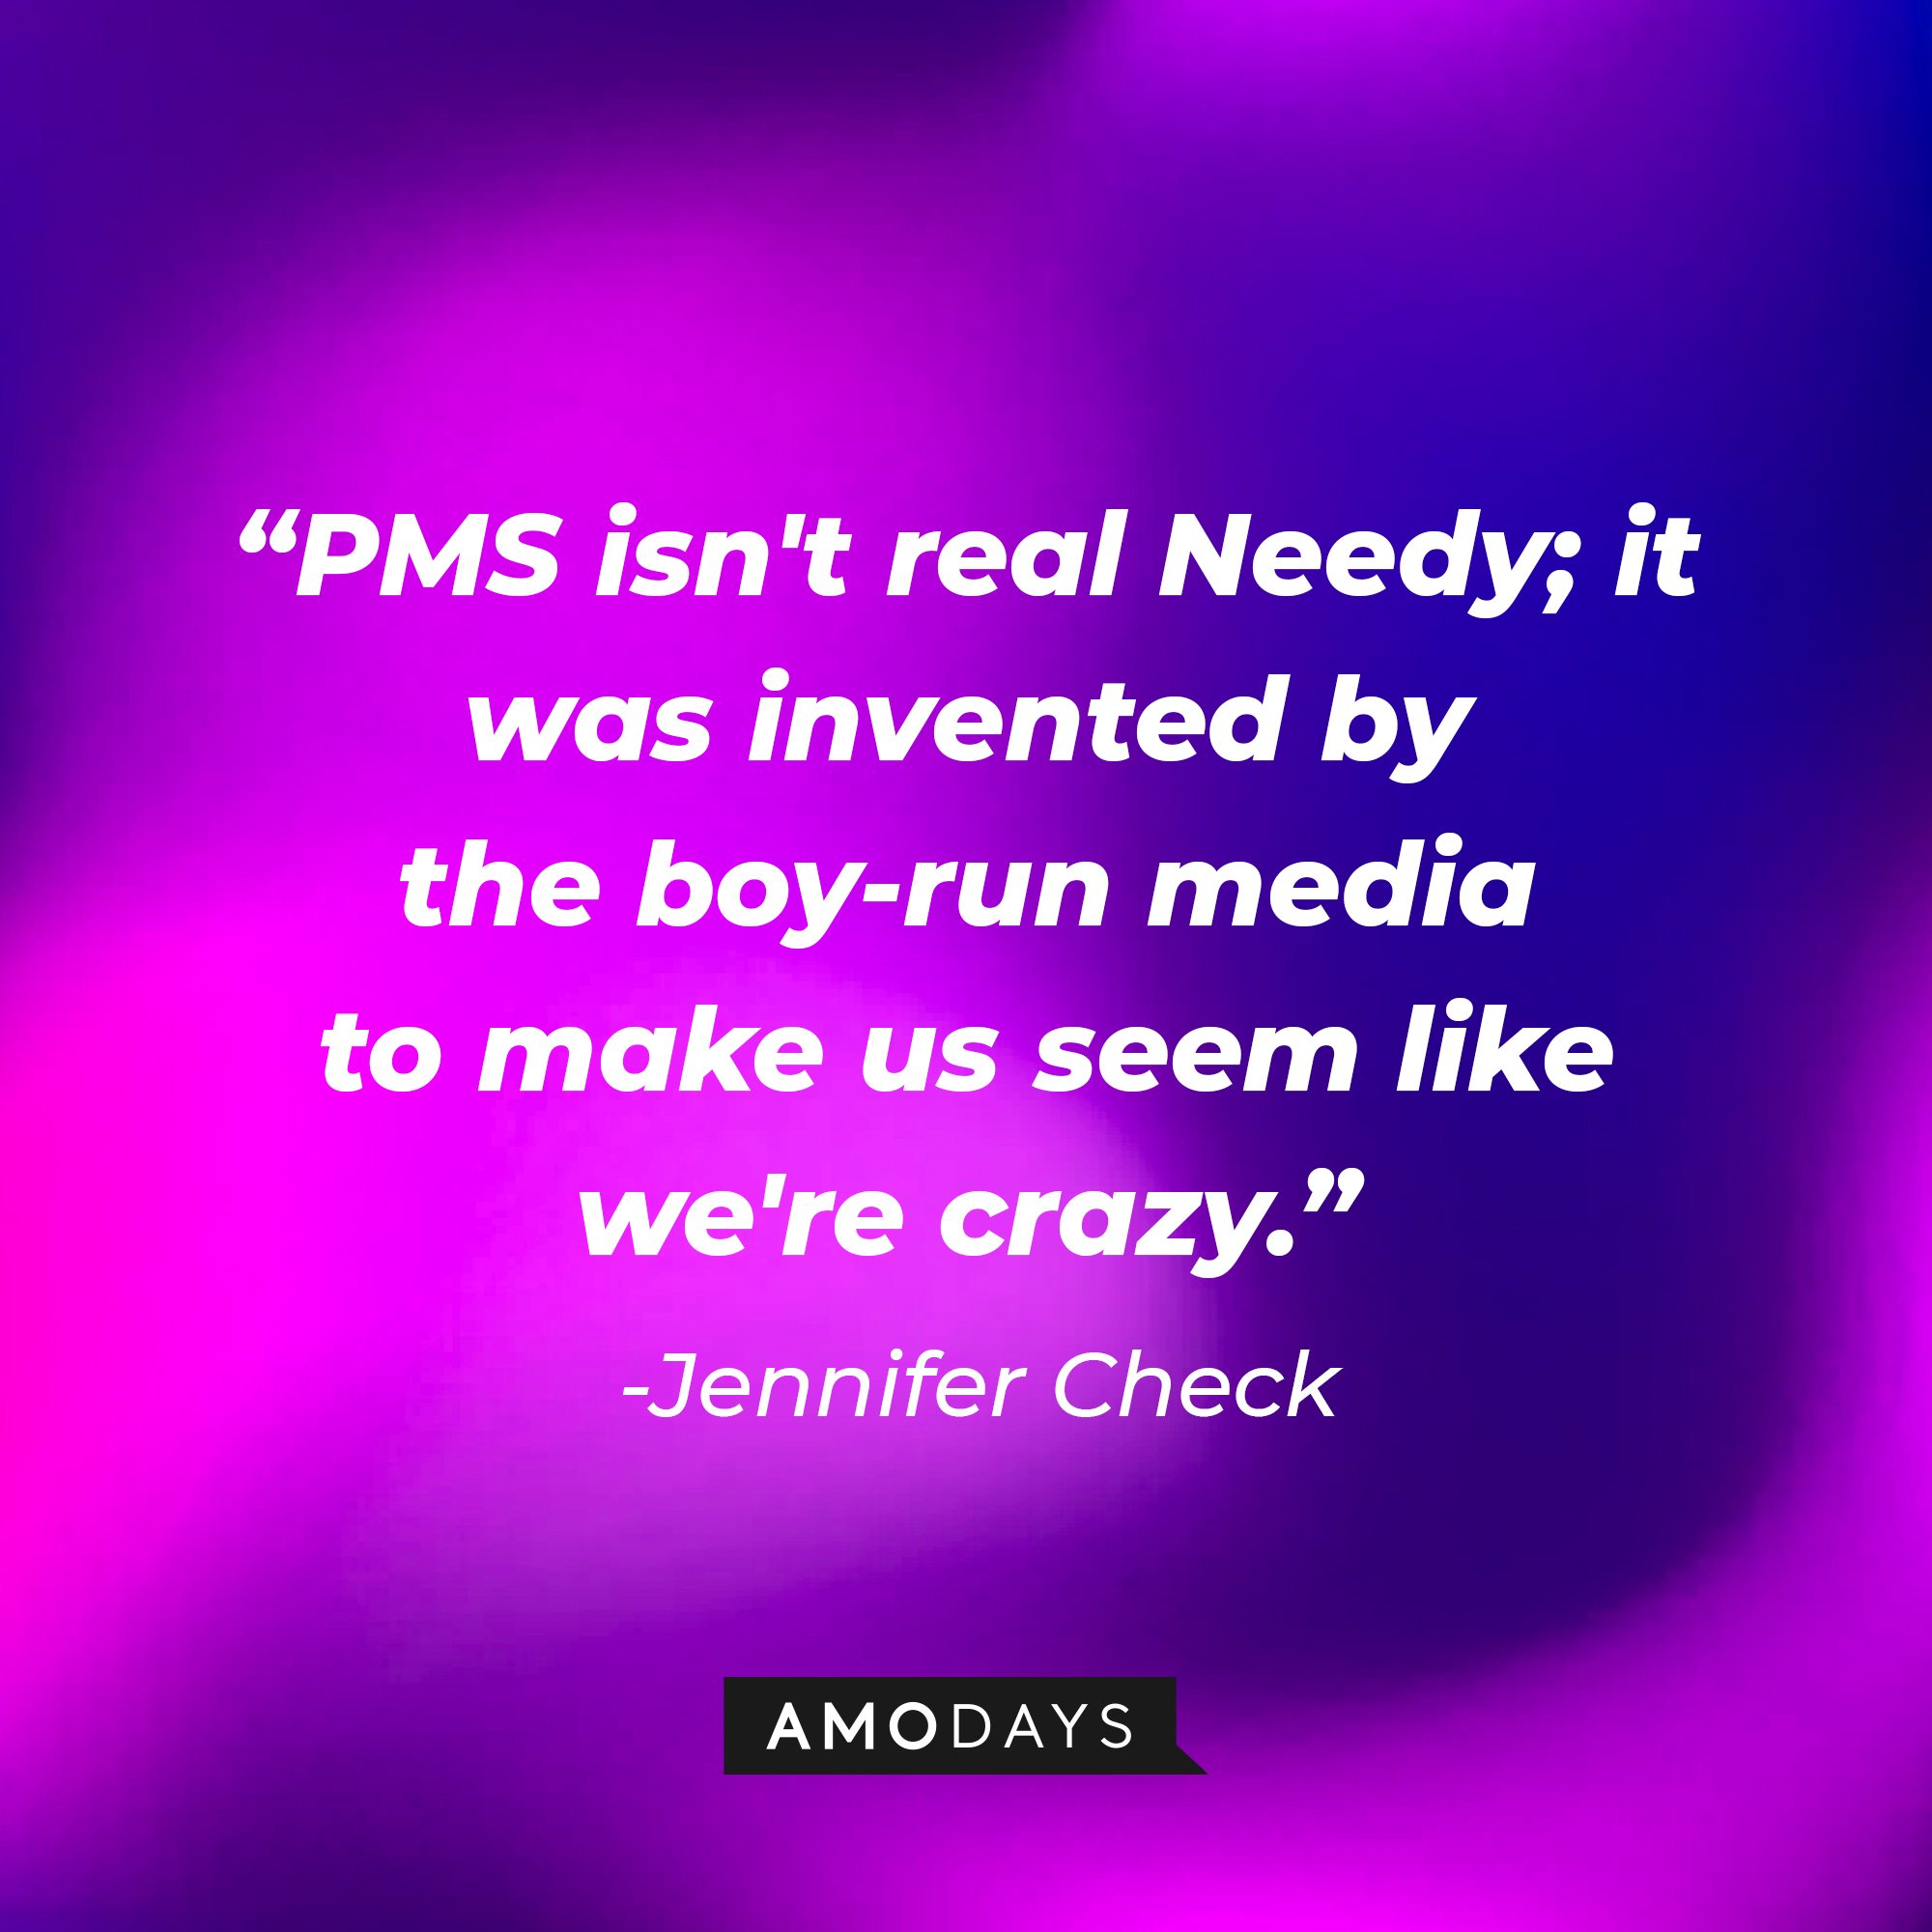 Jennifer Check’s quote: “PMS isn't real Needy; it was invented by the boy-run media to make us seem like we're crazy.”  |Image: AmoDays  